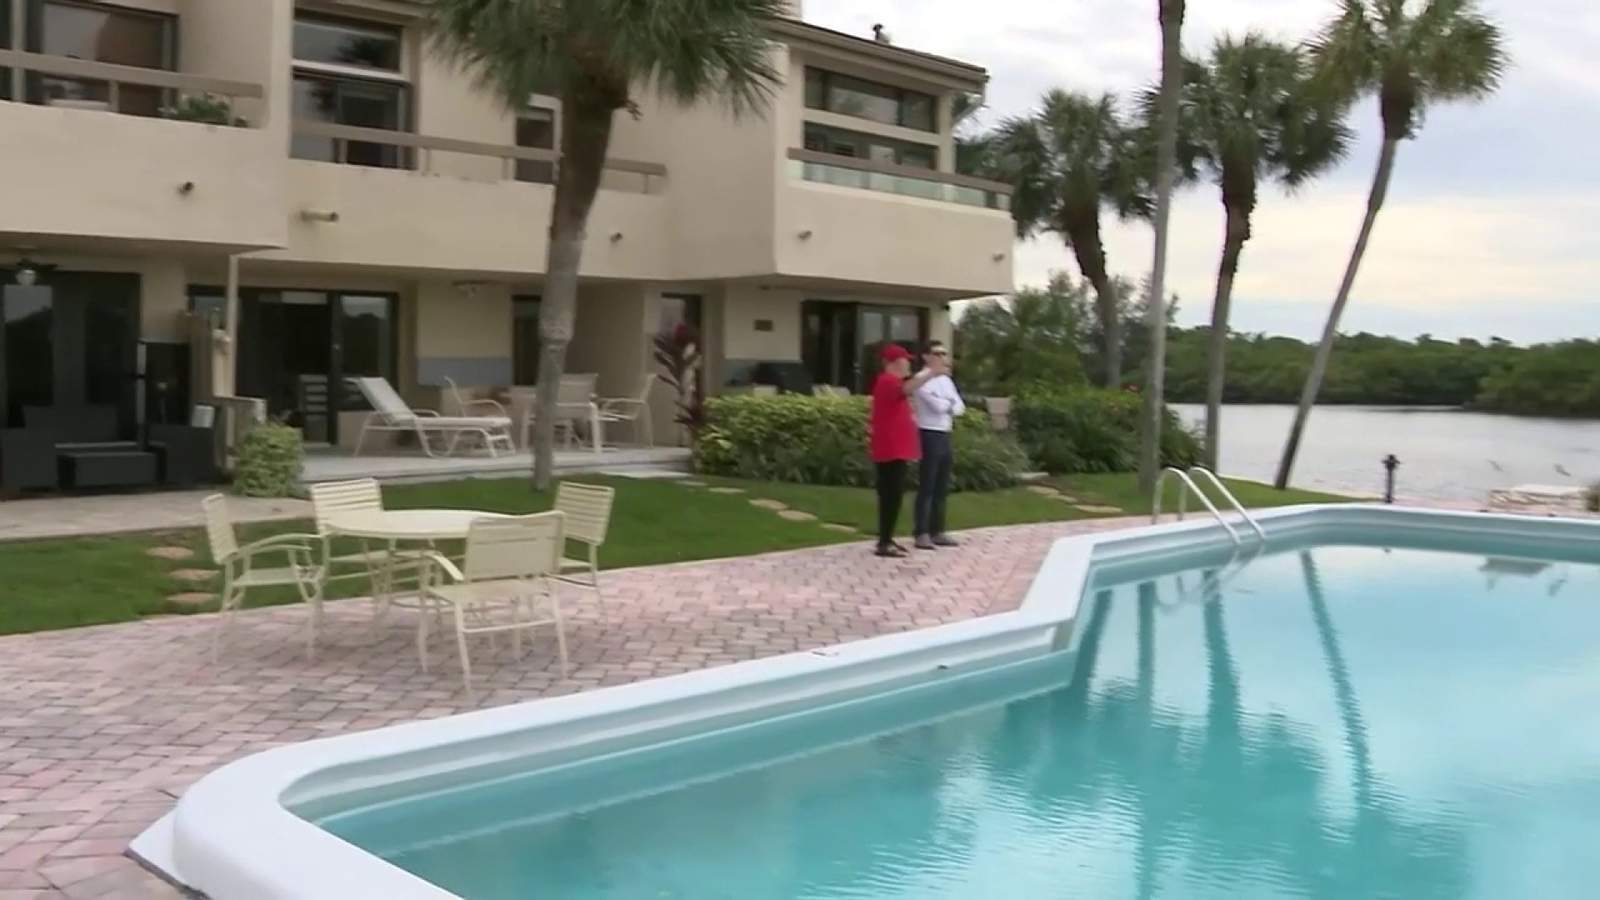 South Florida residents looking to cash in by renting out homes during Super Bowl week